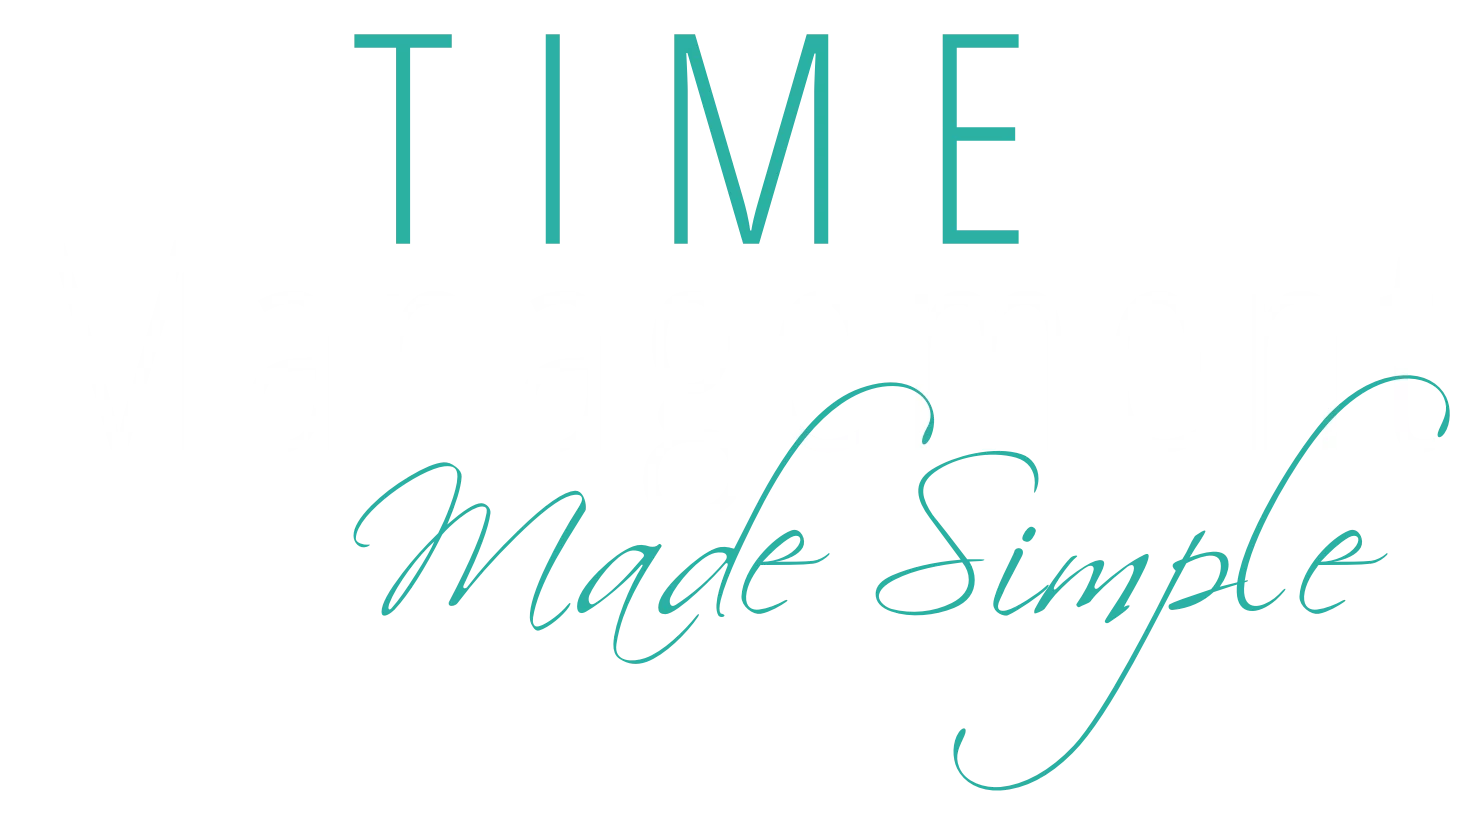 Time Management Made Simple